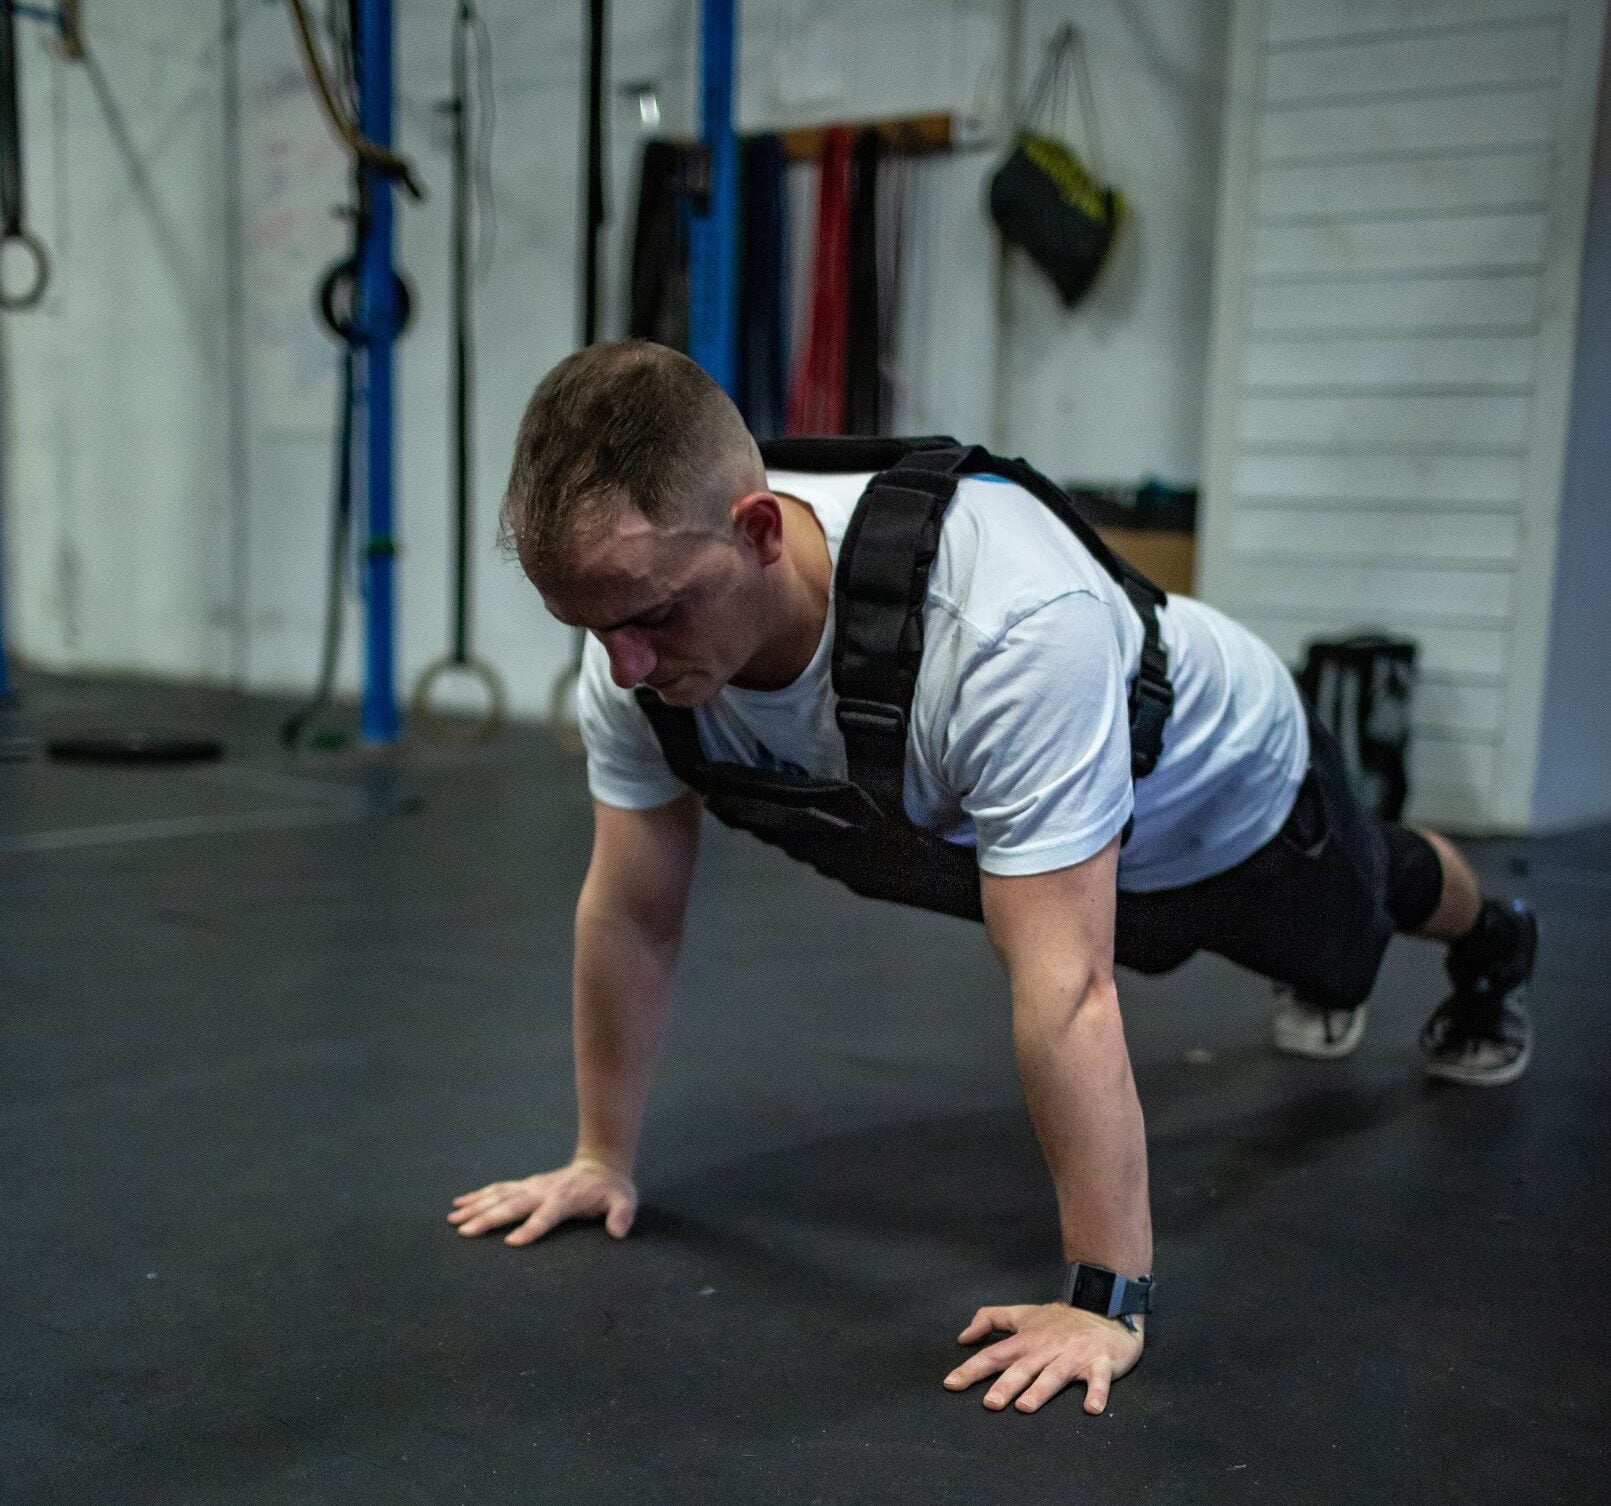 How to master the HSPU in CrossFit - THE PROGRM